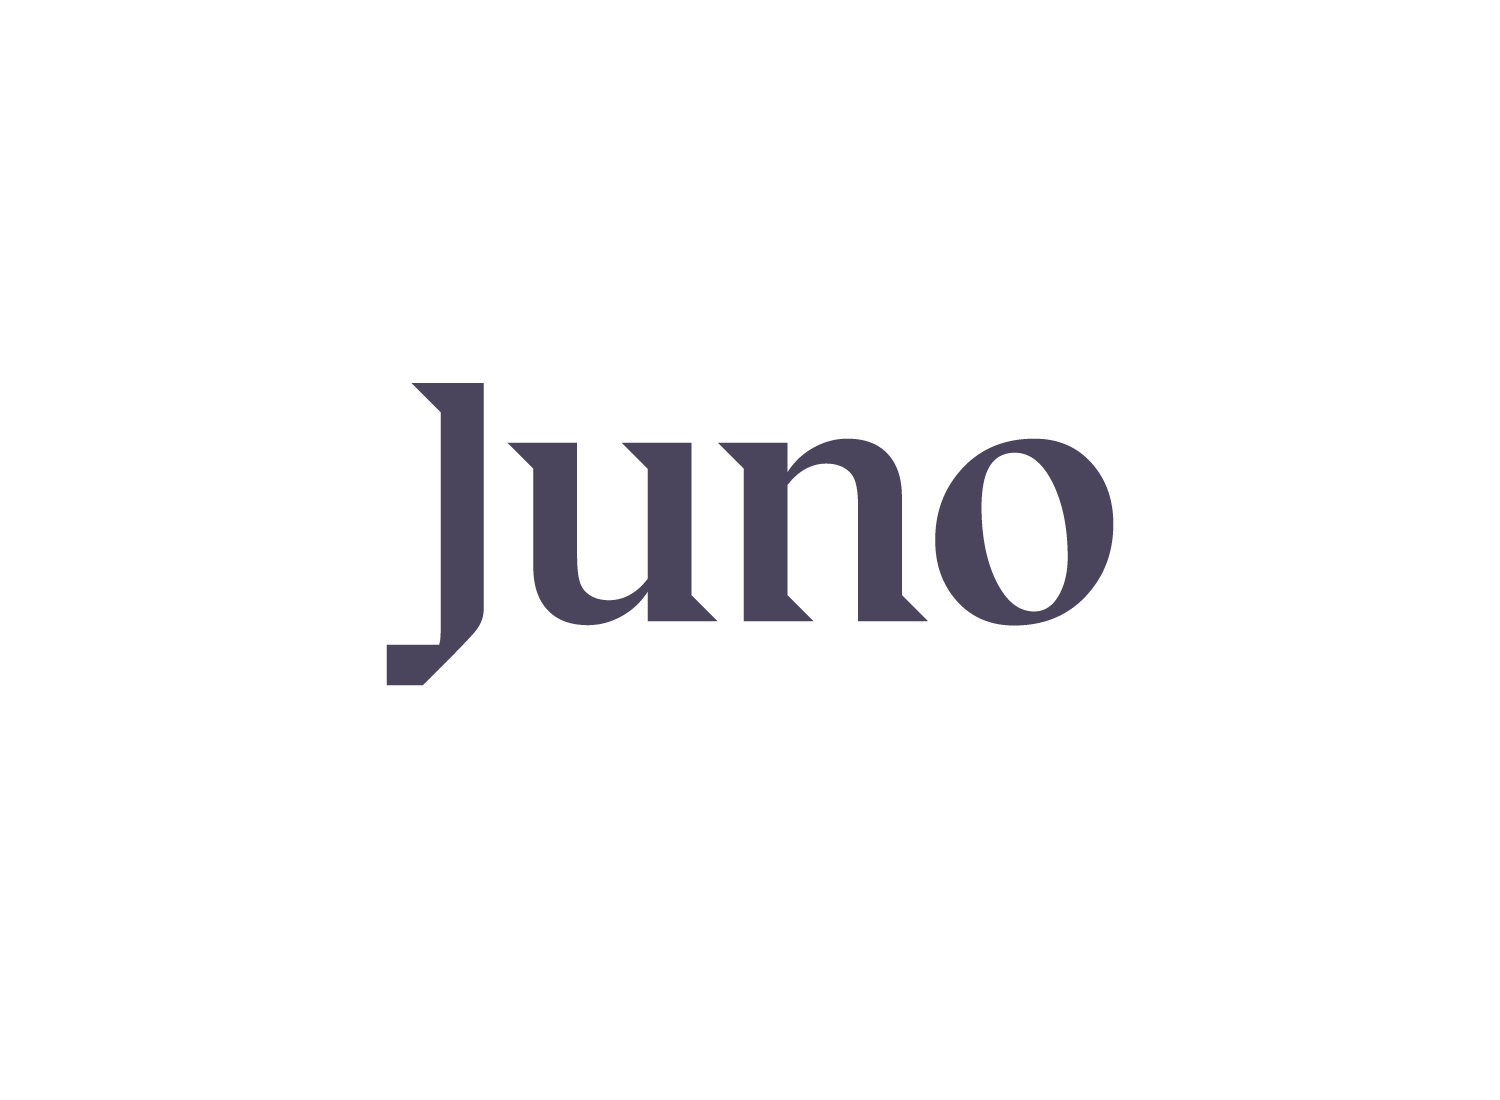 Logo design for Juno College of Technology, formerly HackerYou